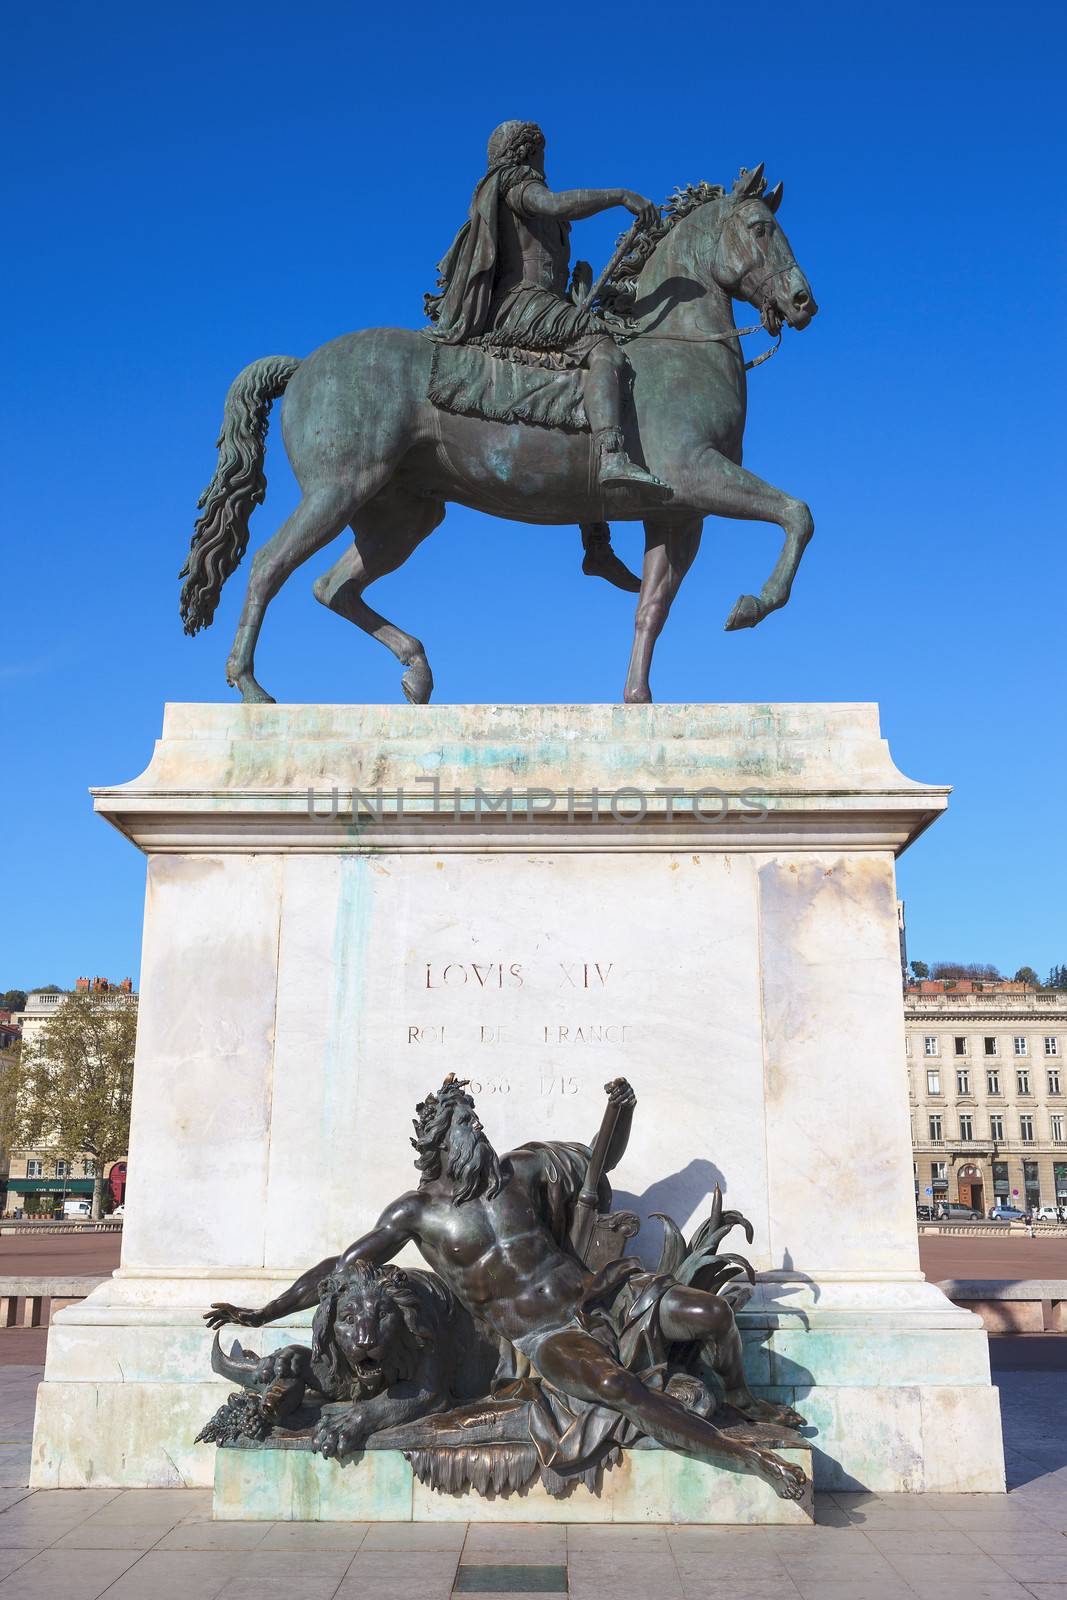 Famous Equestrian statue of Louis XIV by vwalakte